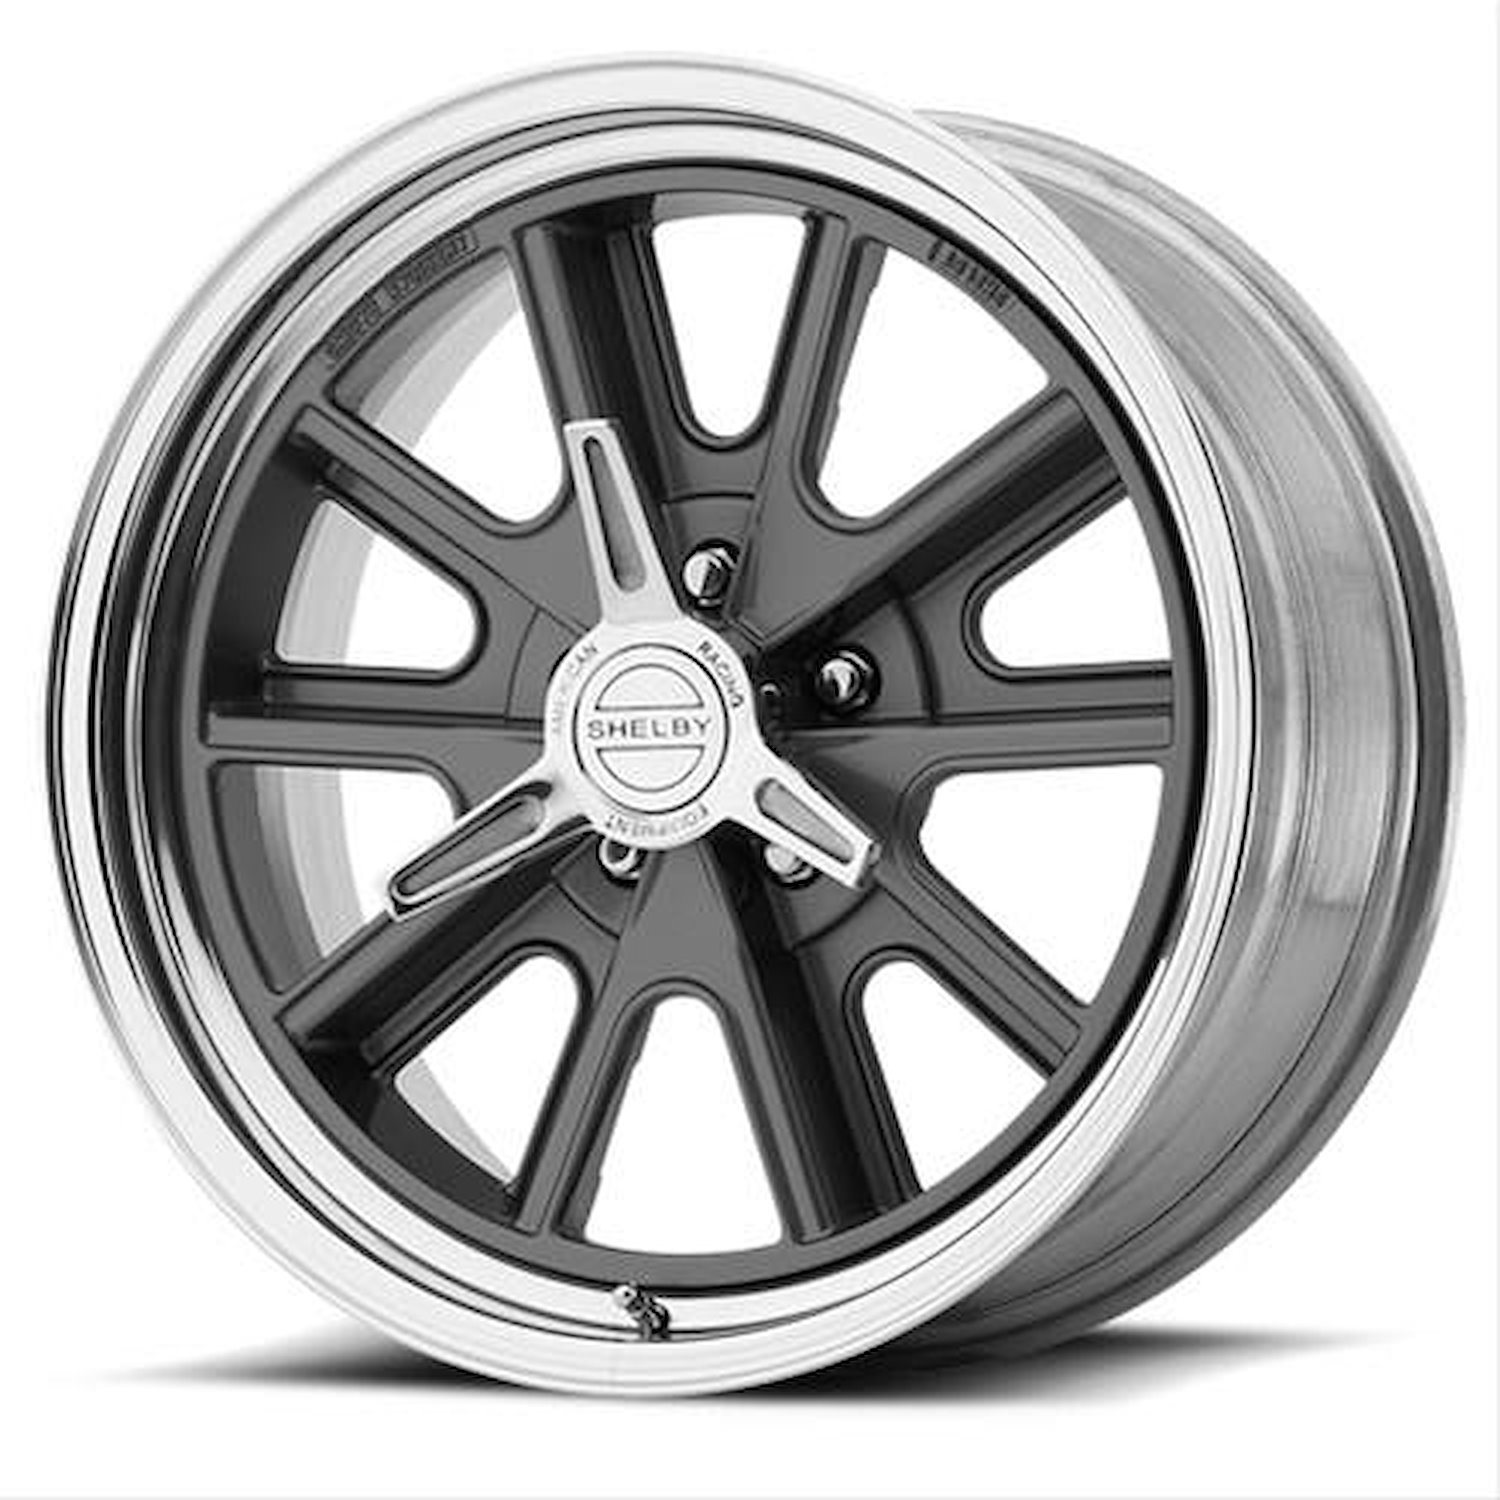 AMERICAN RACING 427 SHELBY COBRA TWO-PIECE MAG GRAY CENTER POLISHED BARREL 17 x 9.5 5x4.5 12 5.72